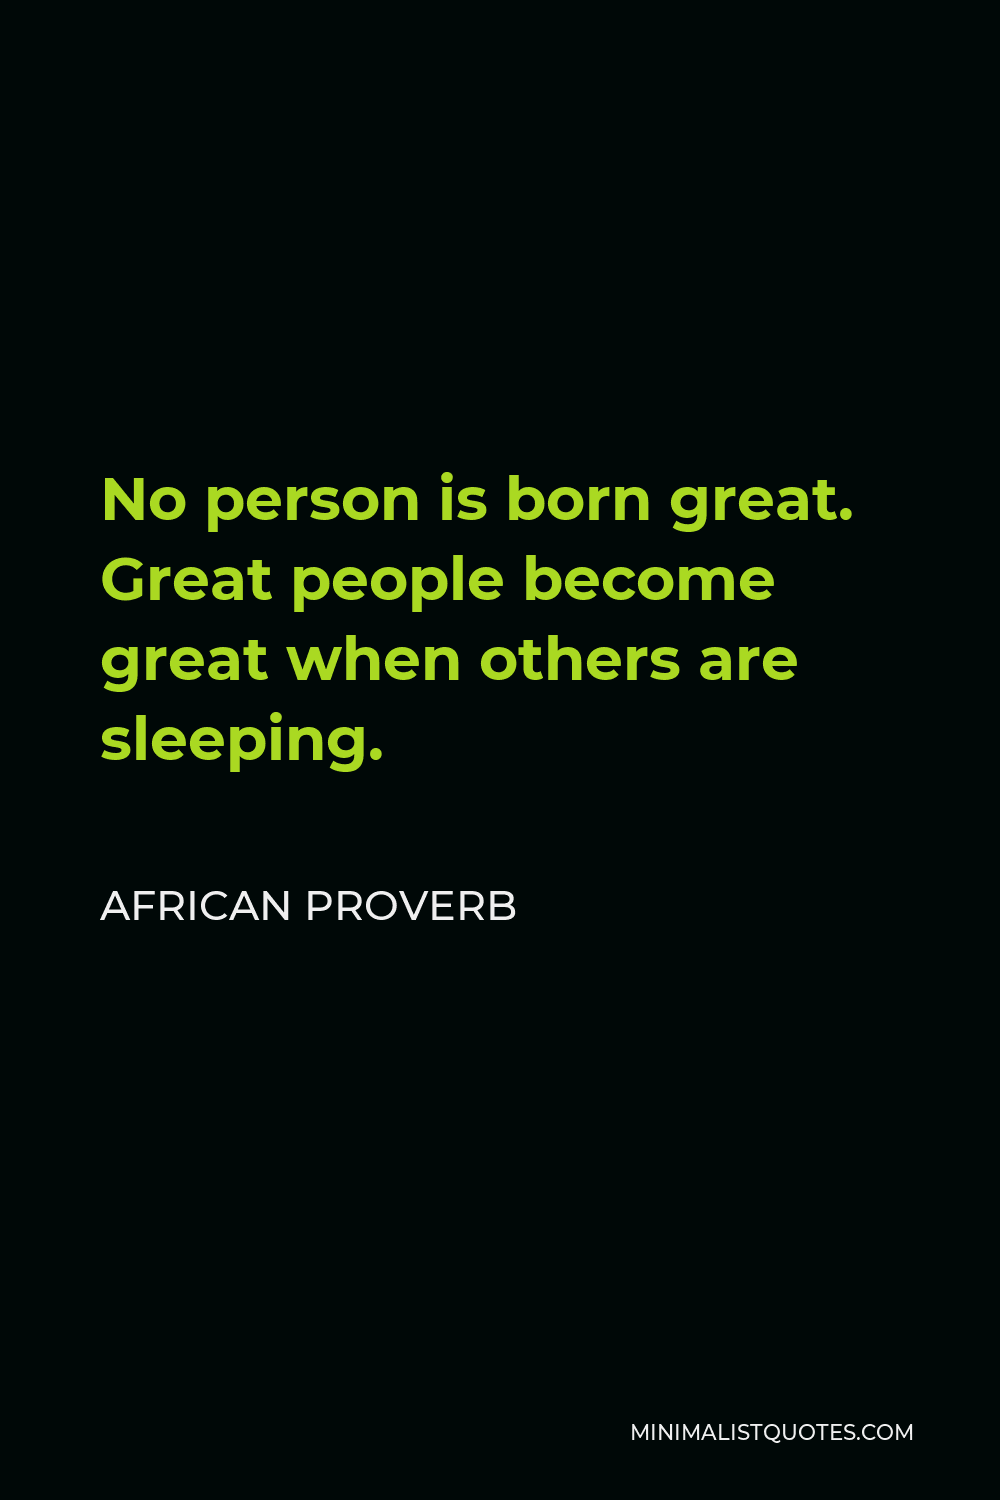 African Proverb Quote - No person is born great. Great people become great when others are sleeping.